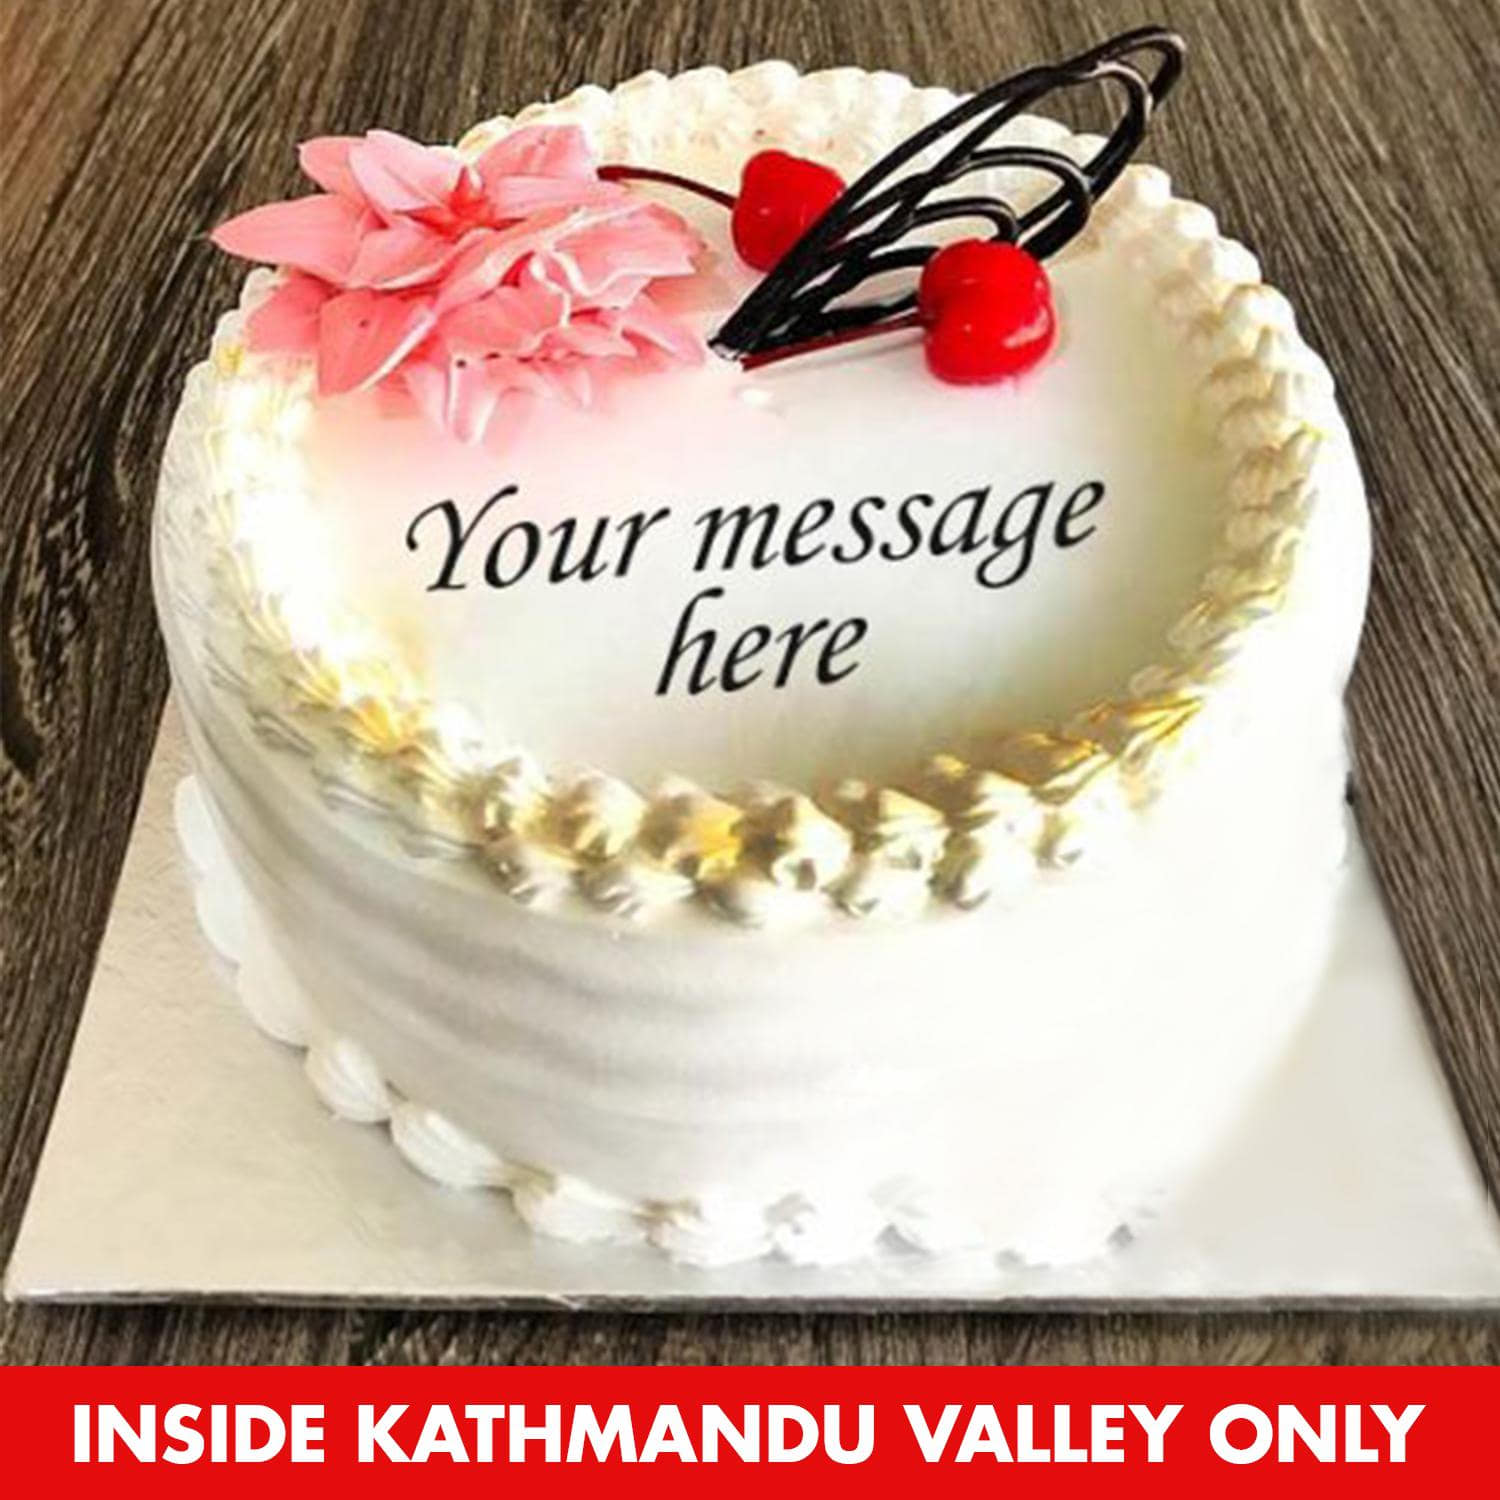 10+ Best Cakes in Bhopal | Cakes Profiles, Reviews and Prices | VenueLook